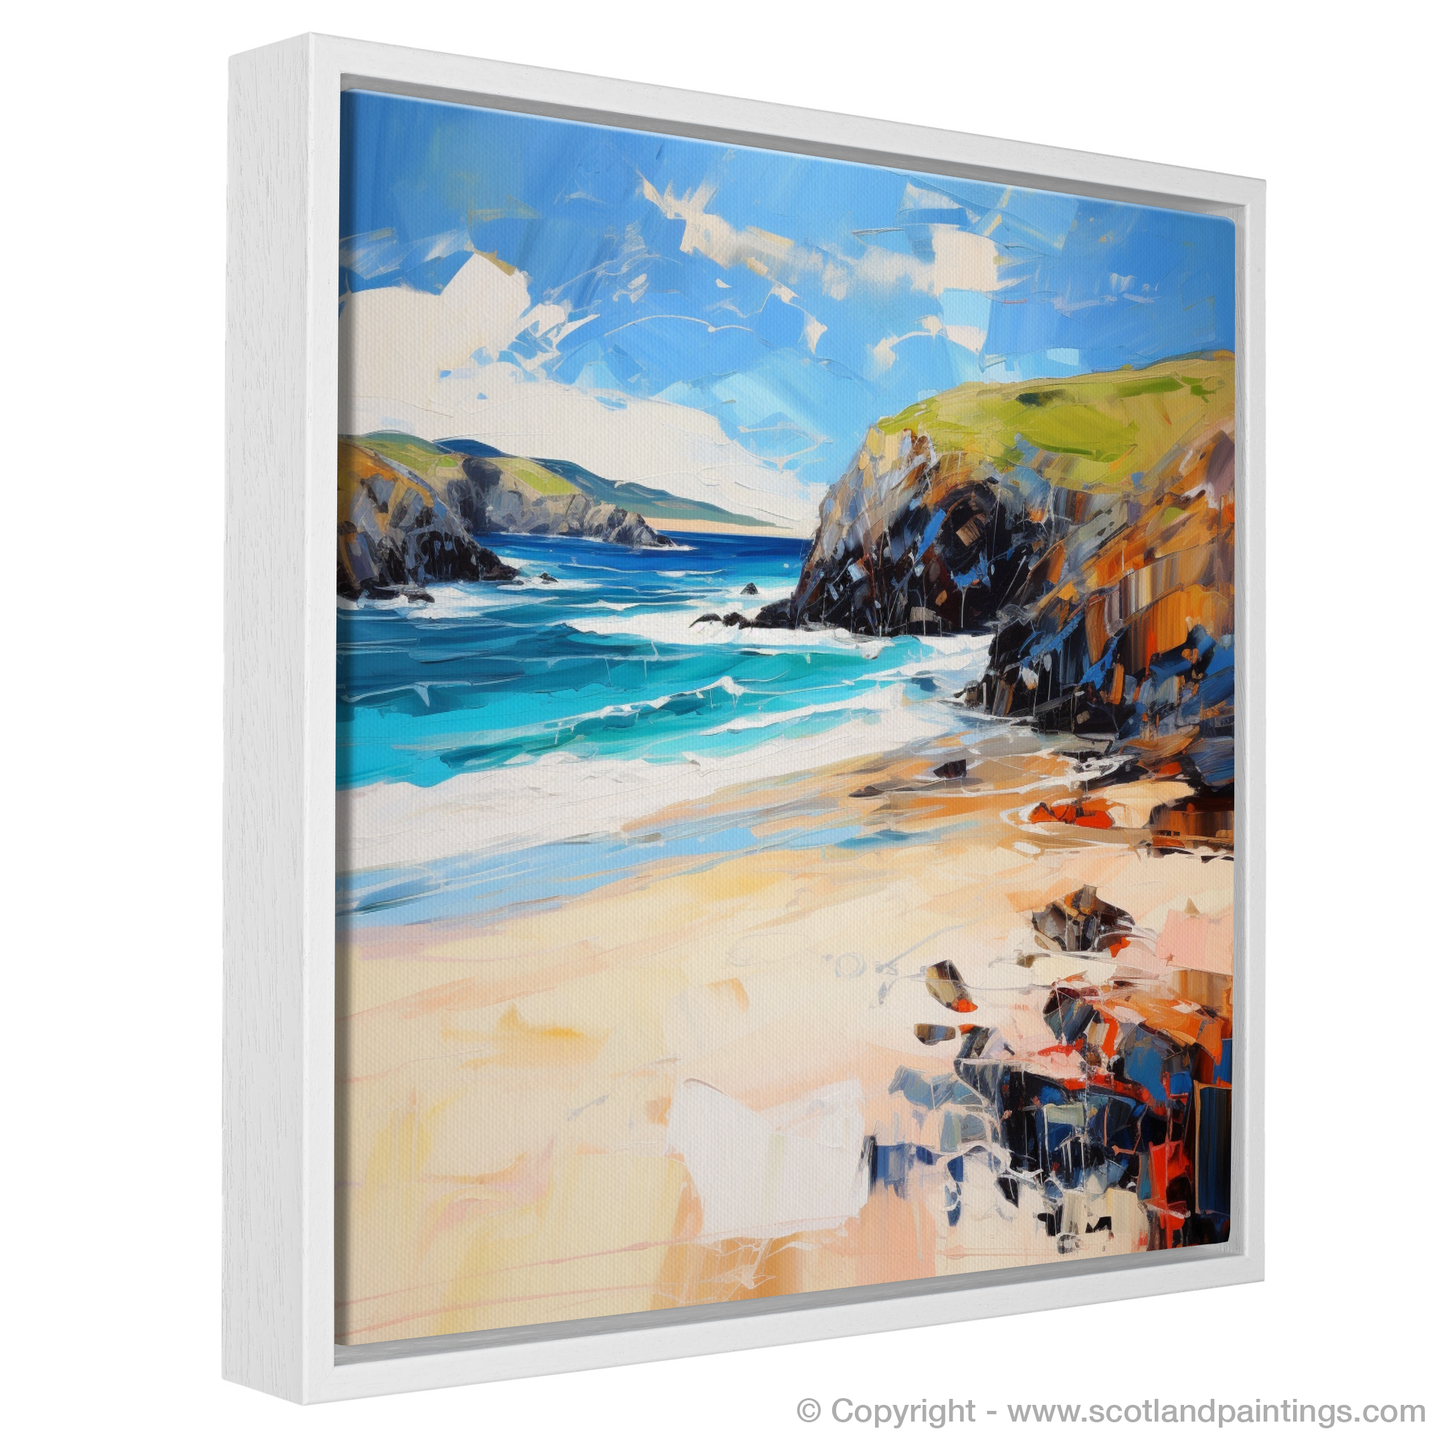 Painting and Art Print of Durness Beach, Sutherland entitled "Durness Beach Embrace: An Expressionist Ode to Scotland's Rugged Shore".